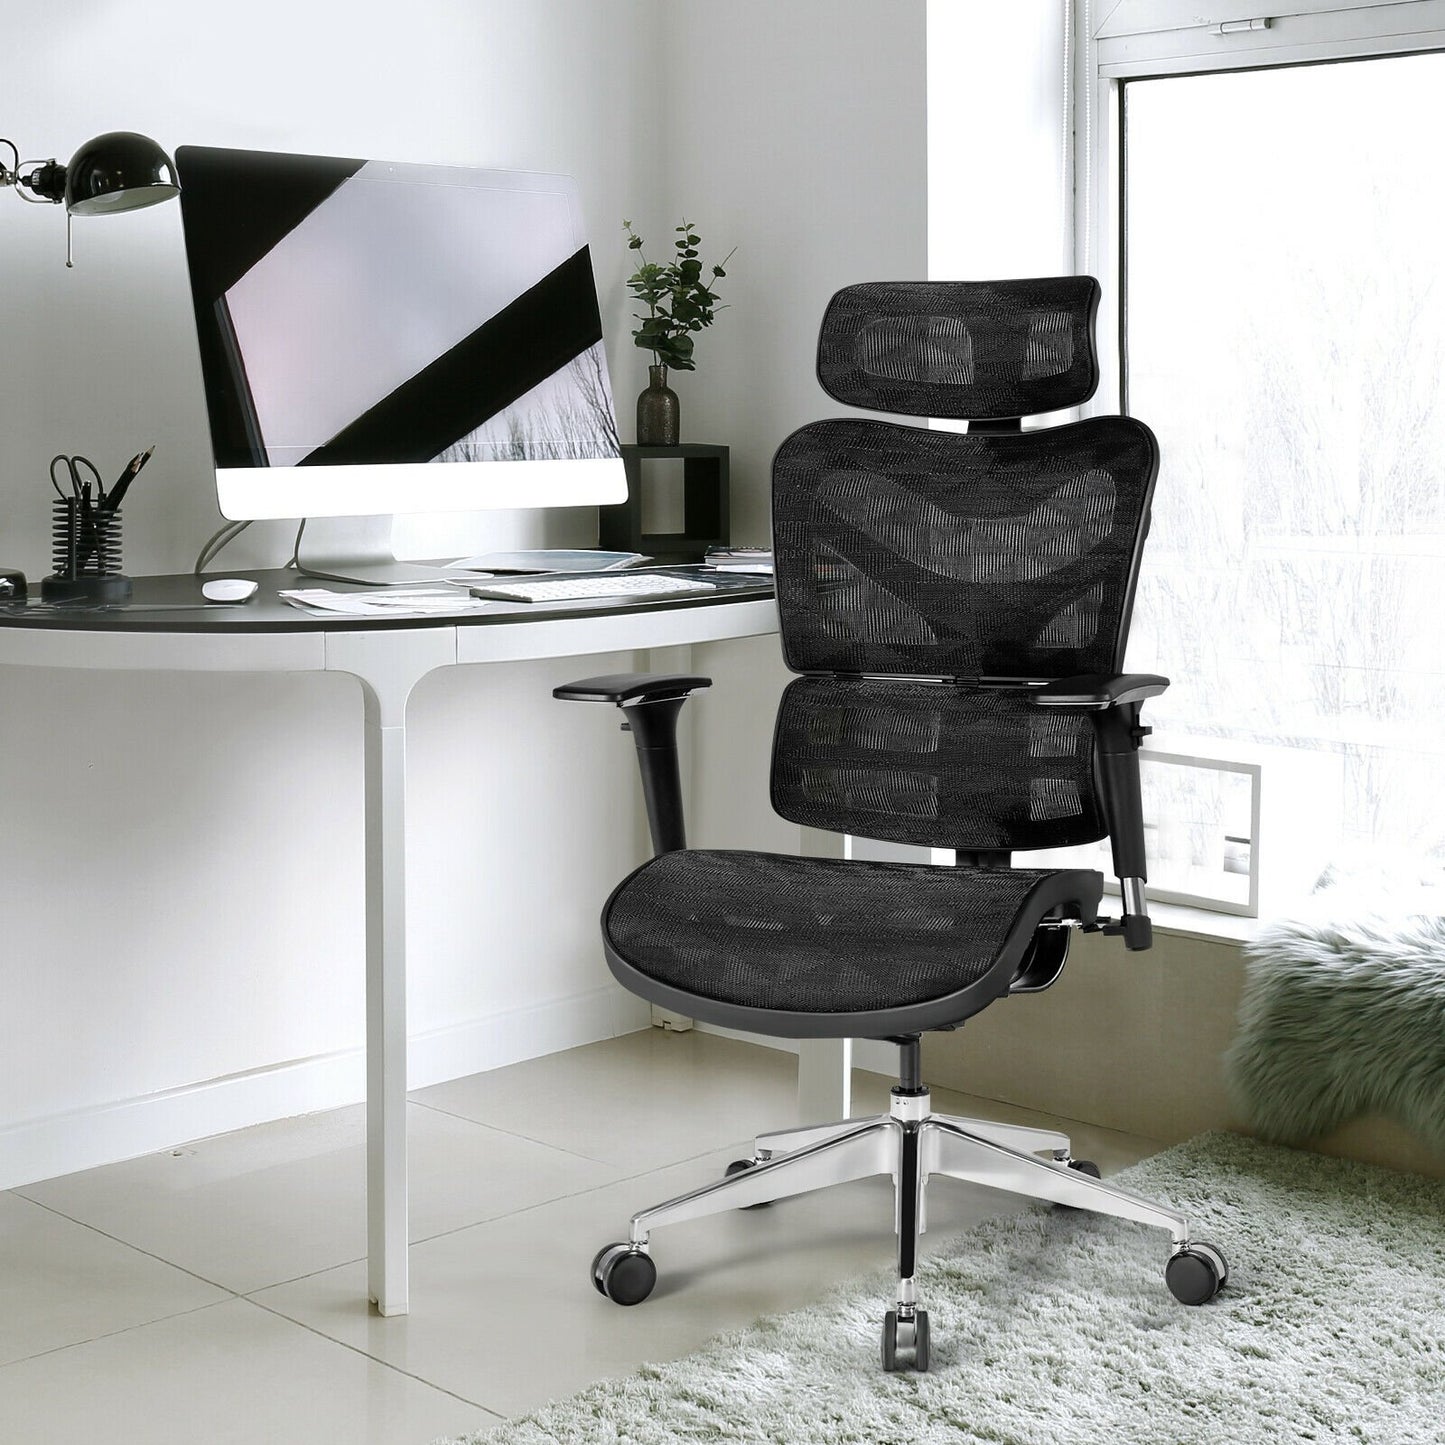 Ergonomic Mesh Adjustable High Back Office Chair with Lumbar Support, Black - Gallery Canada